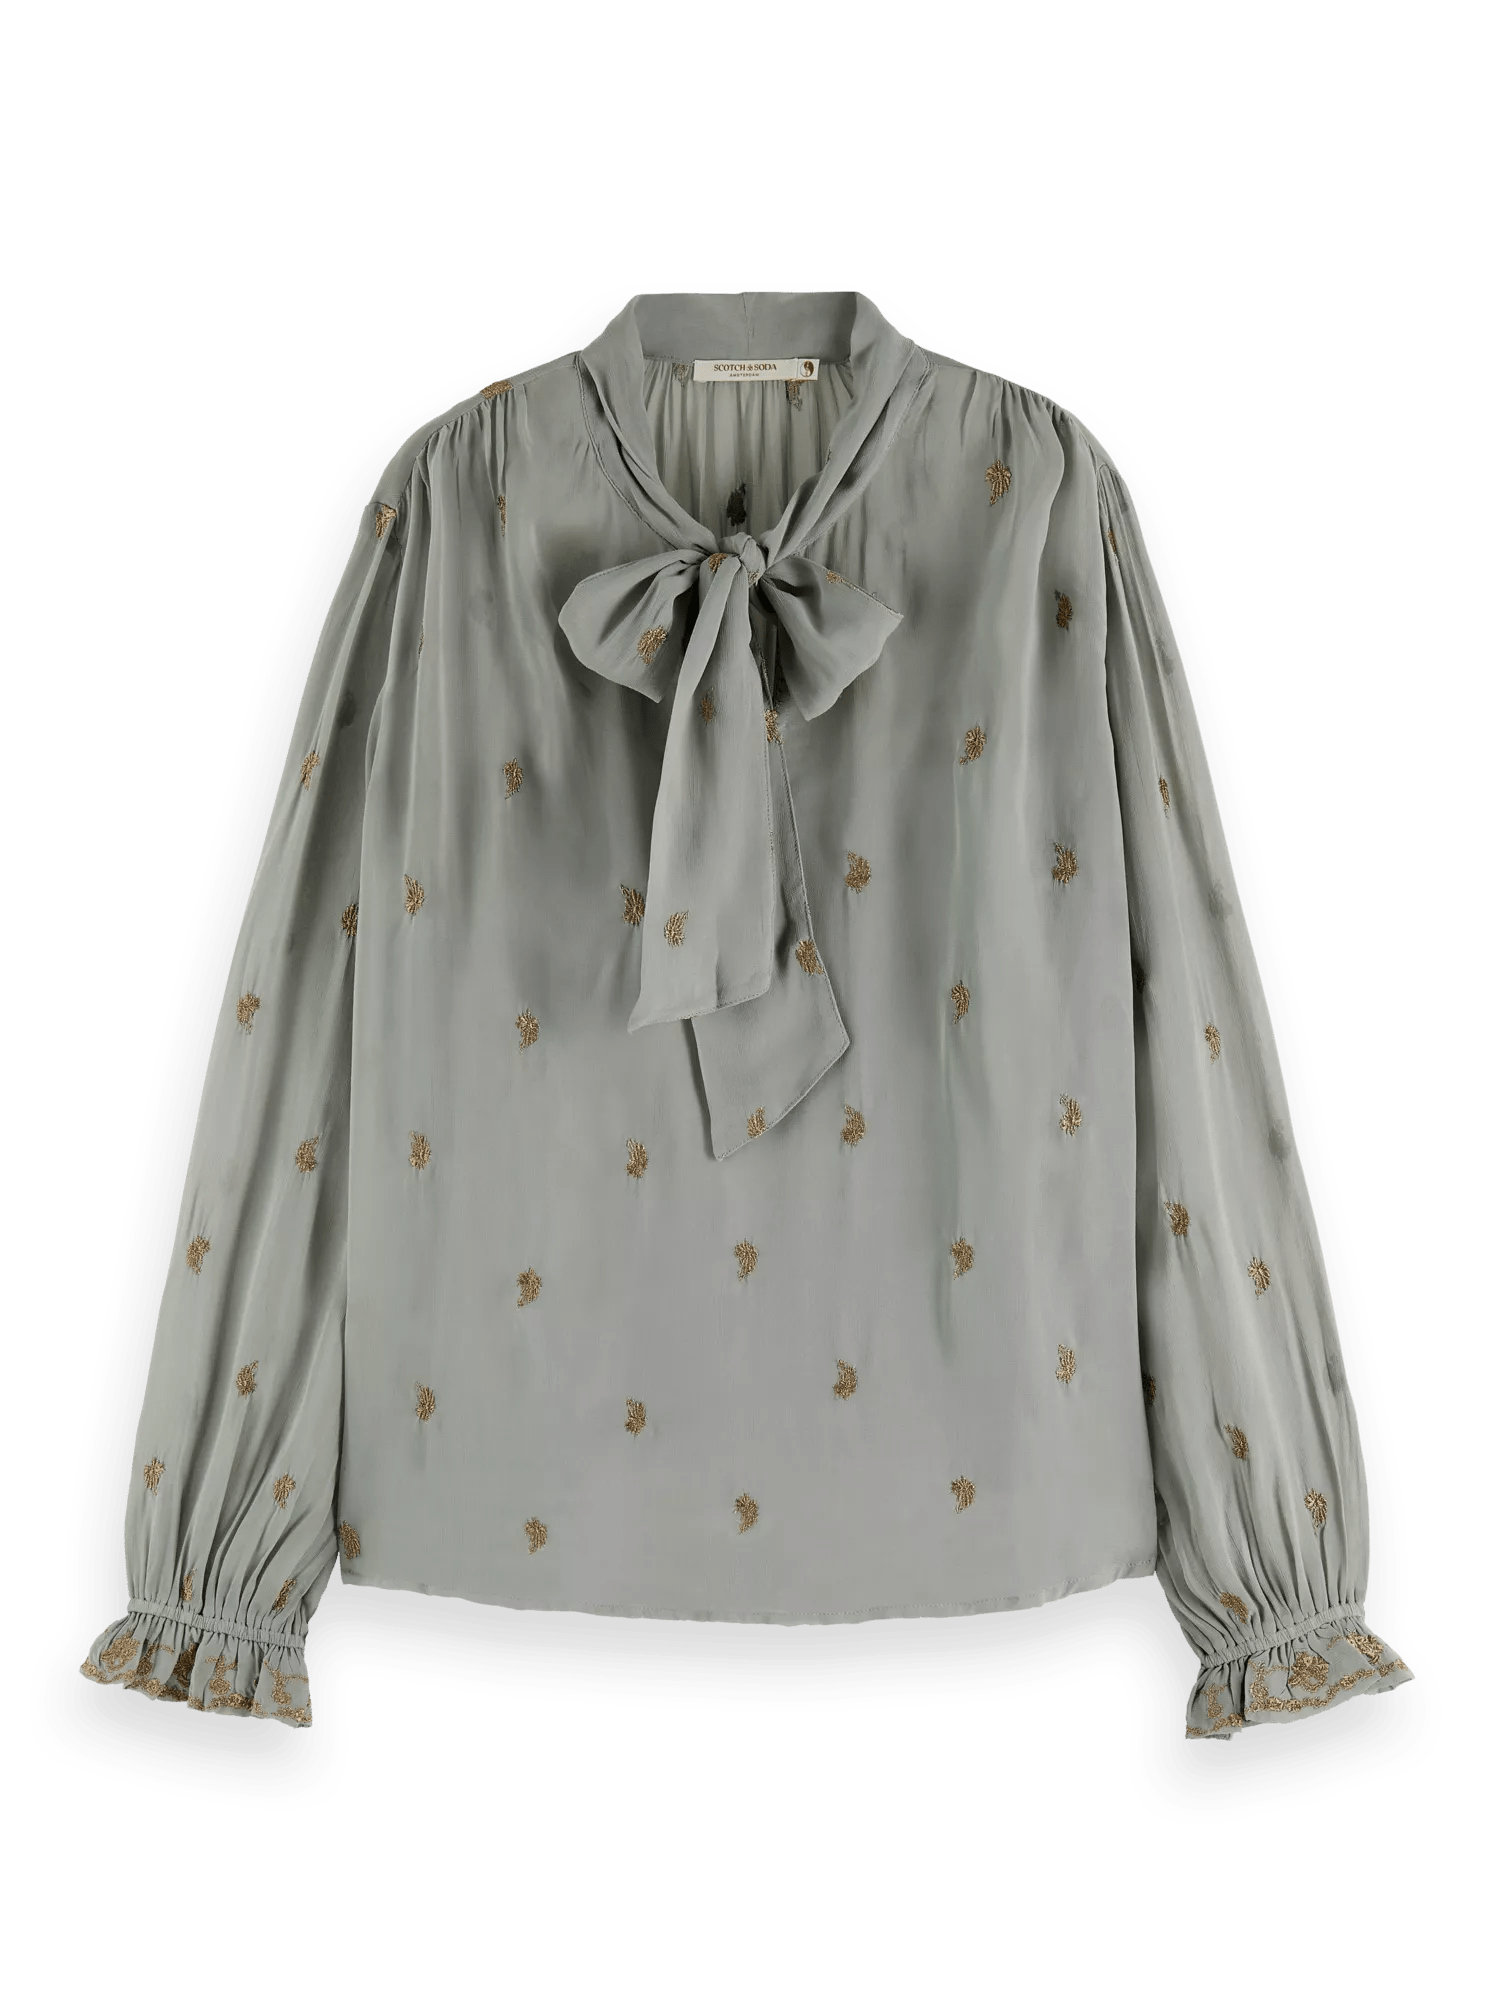 Maison Scotch - Embroidered Neck-Tie Blouse - Grey Sheer Jacquard